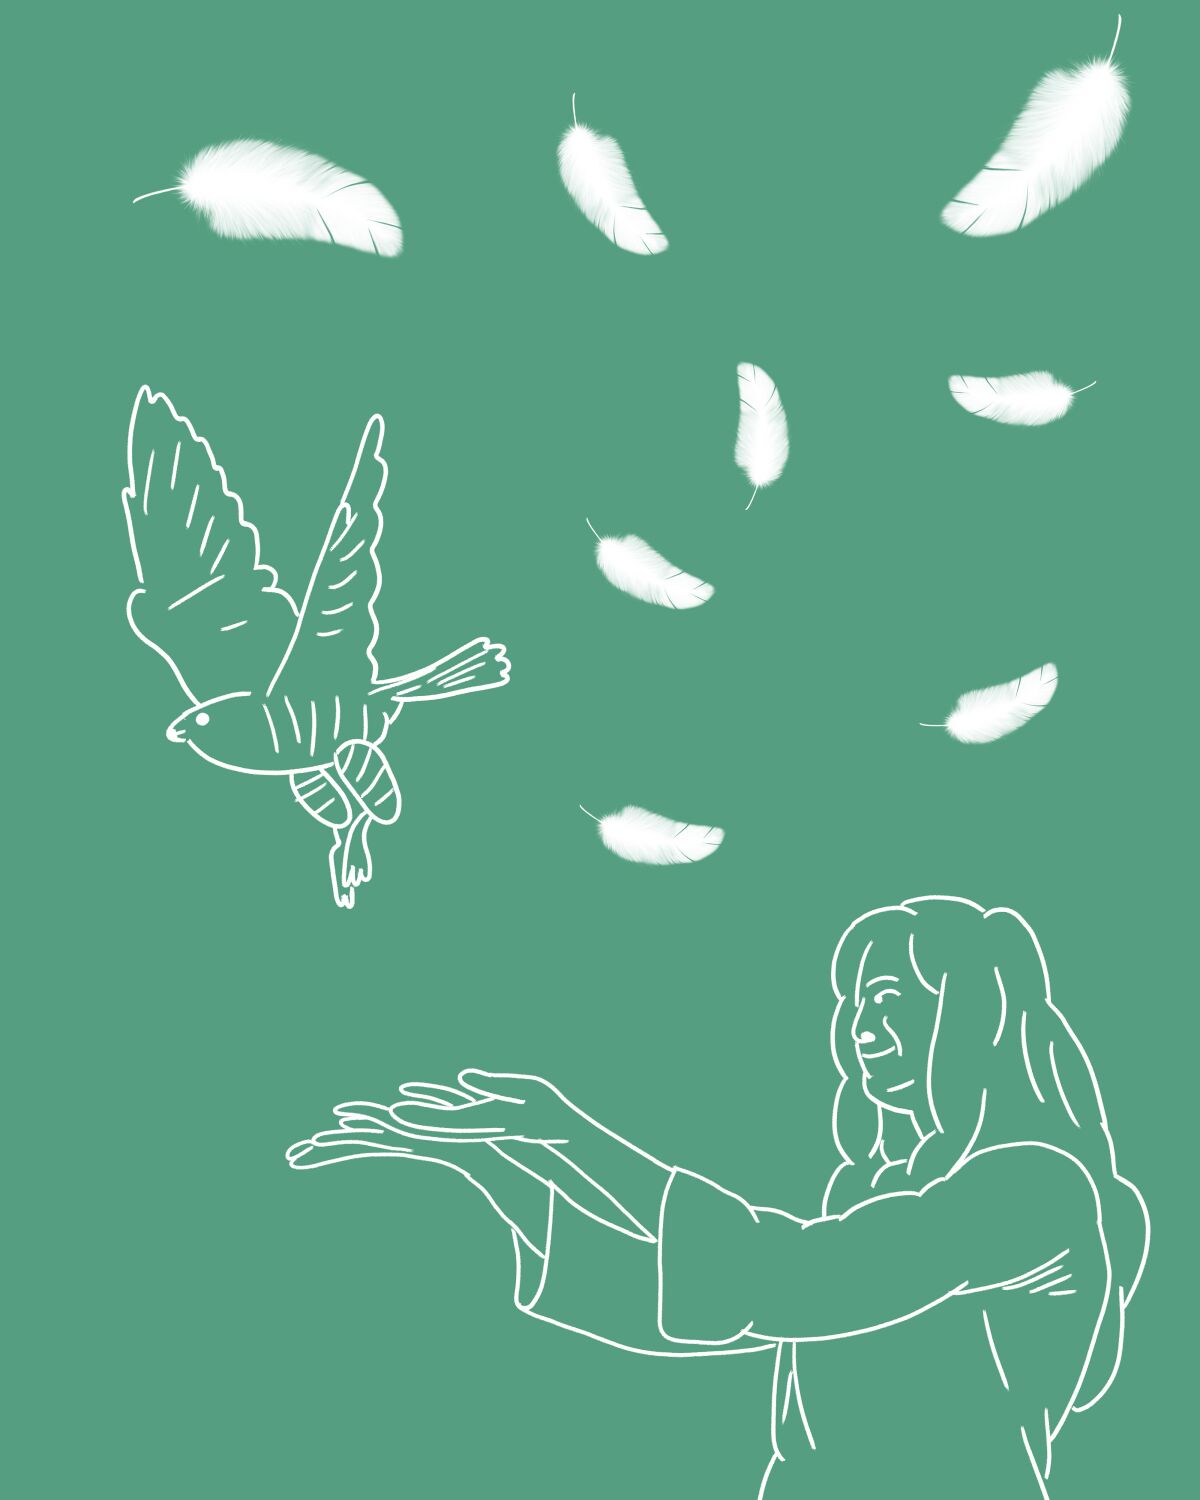 Illustration of a girl releasing a falcon